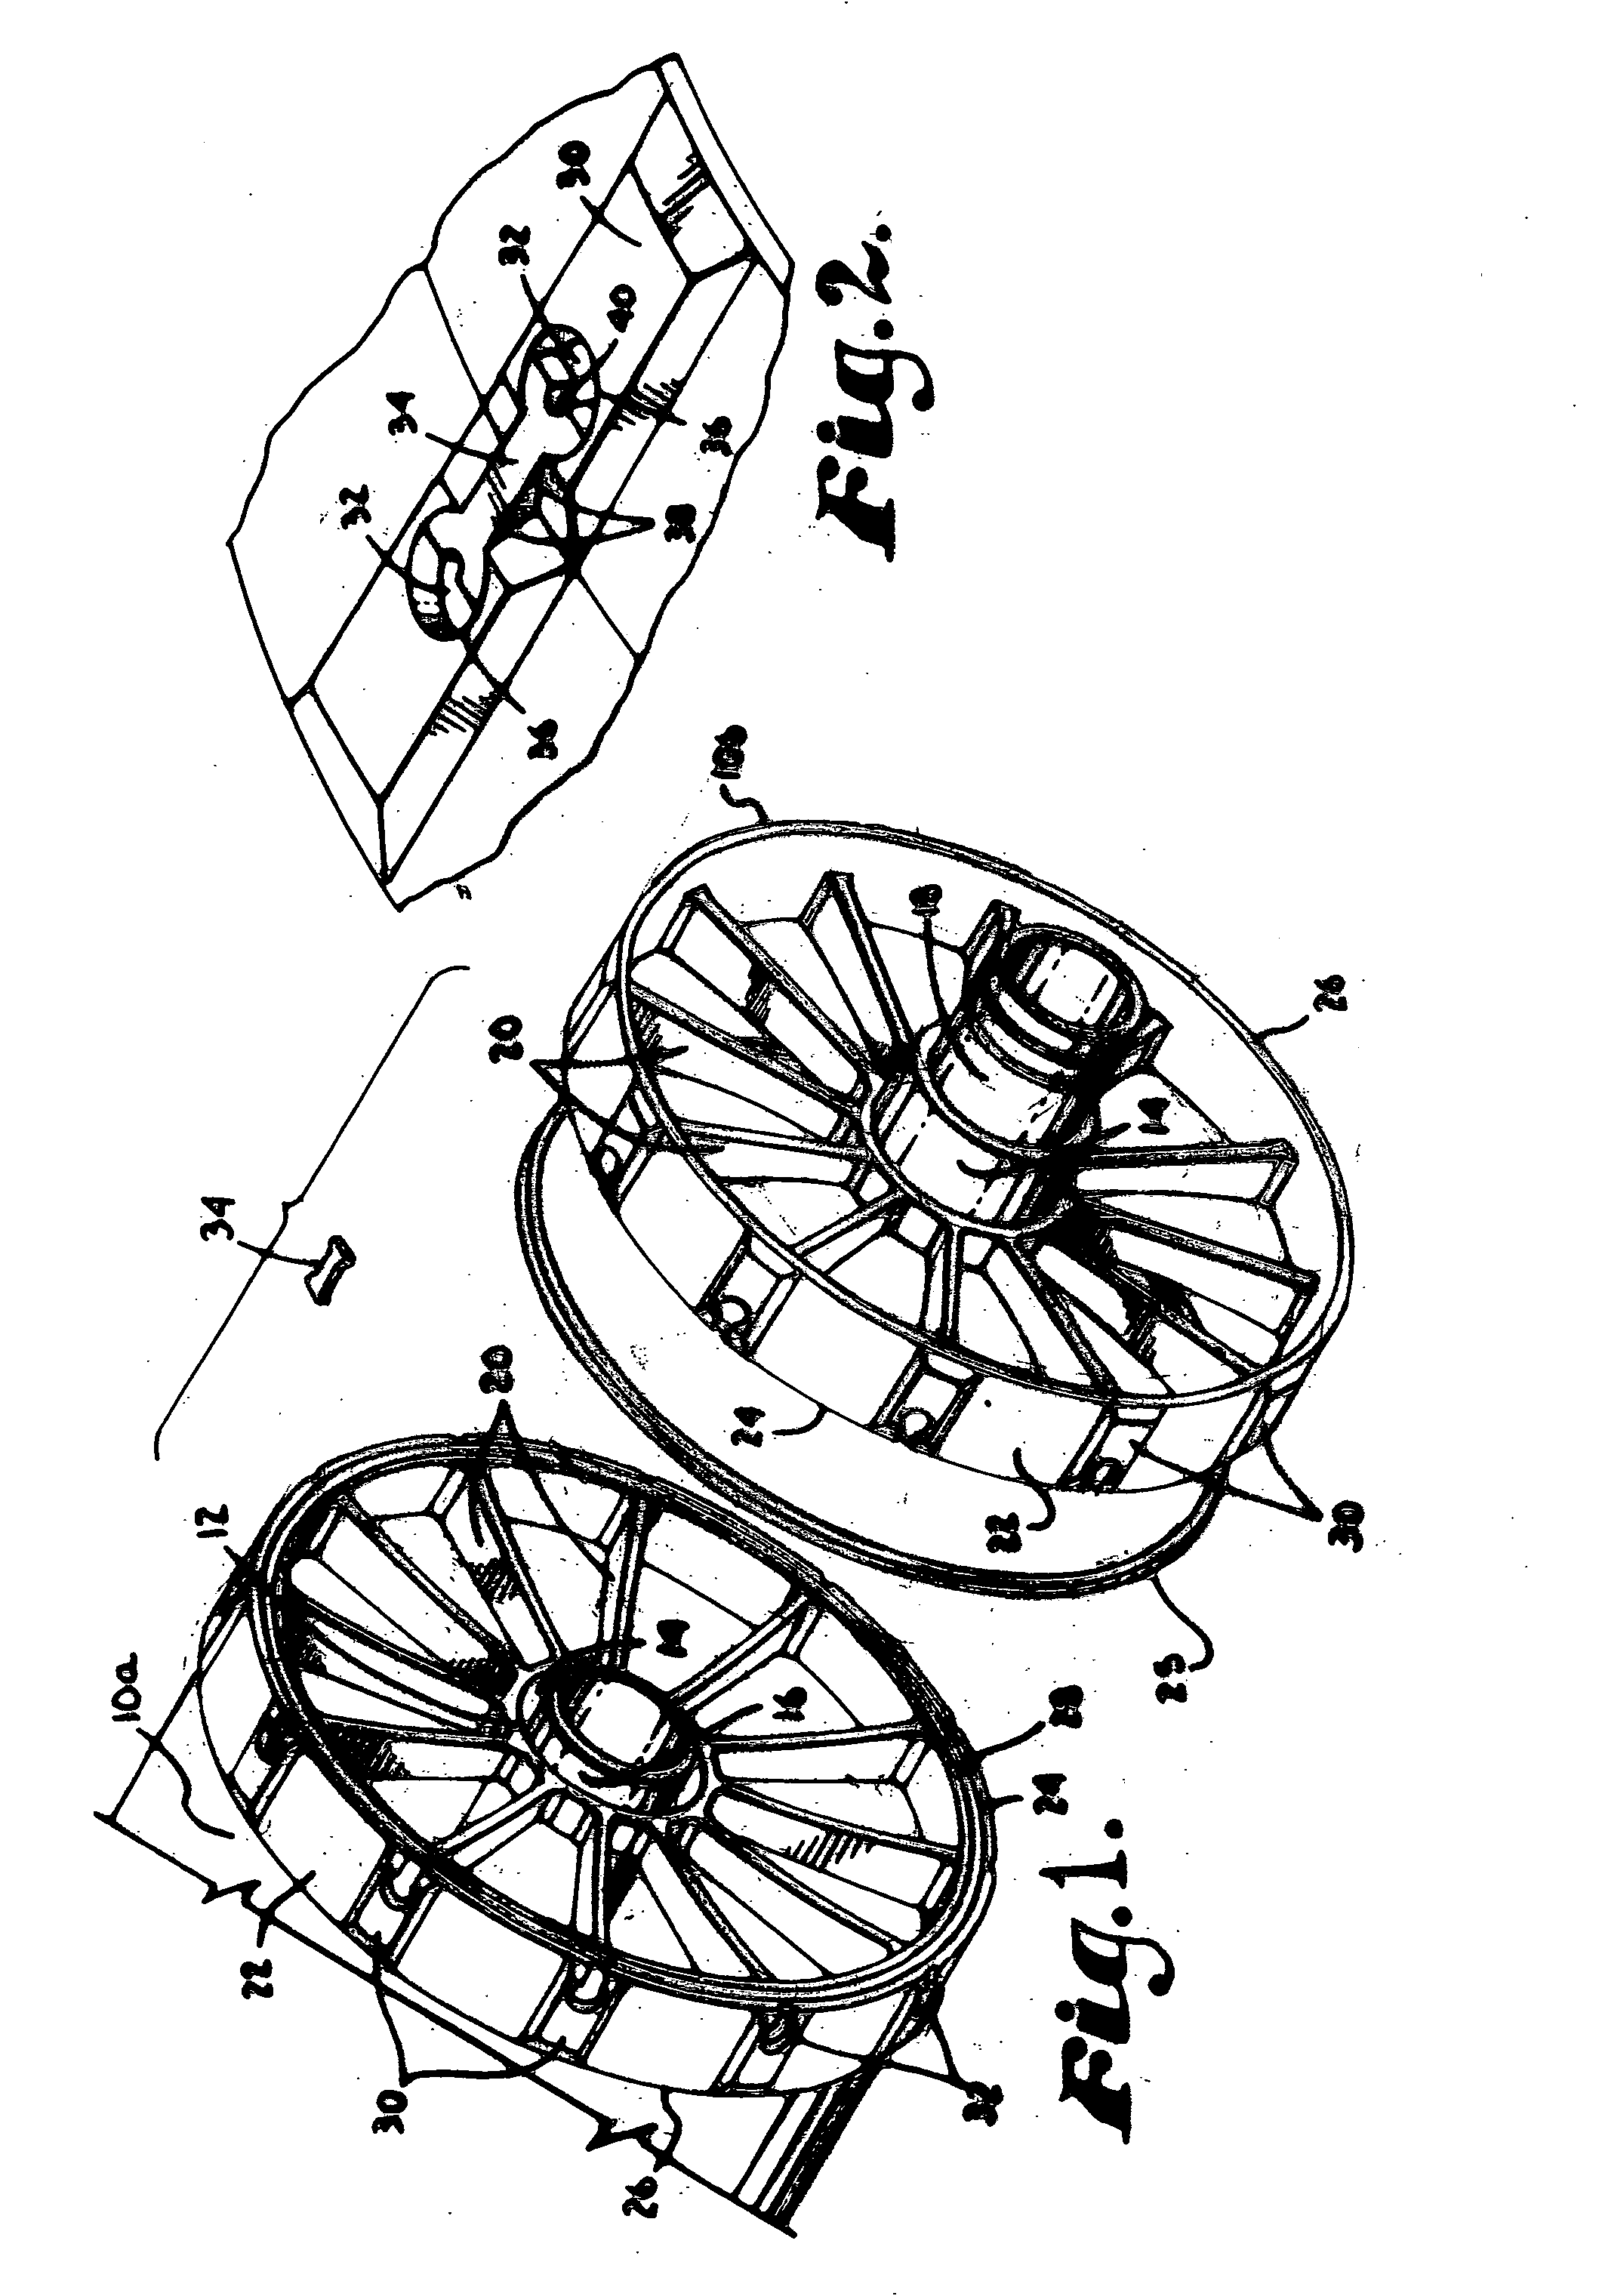 Filtration element and method of constructing a filtration assembly